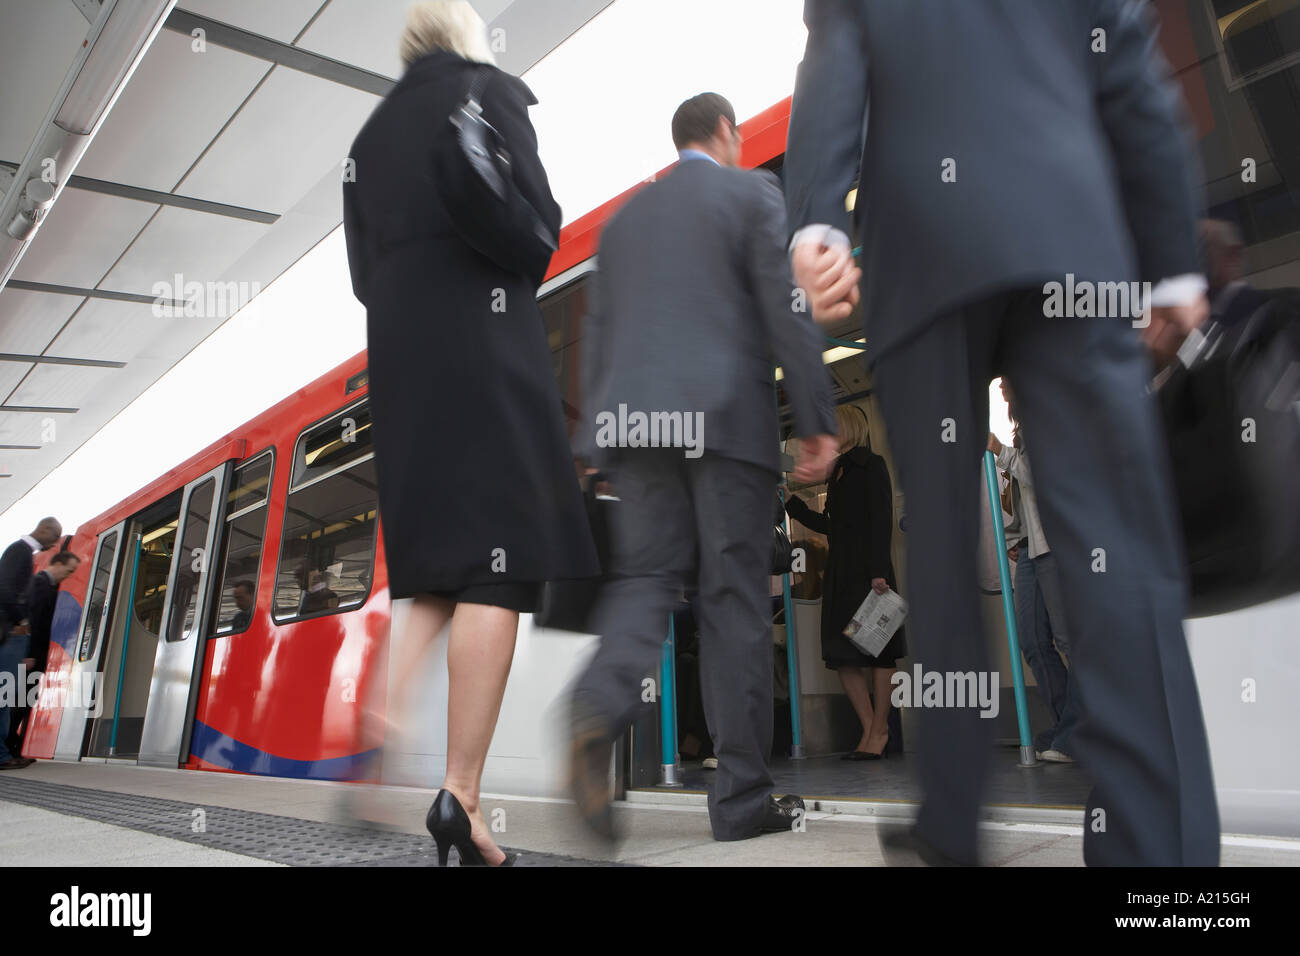 Business Commuters Getting on Train, motion blur, low angle view Stock Photo